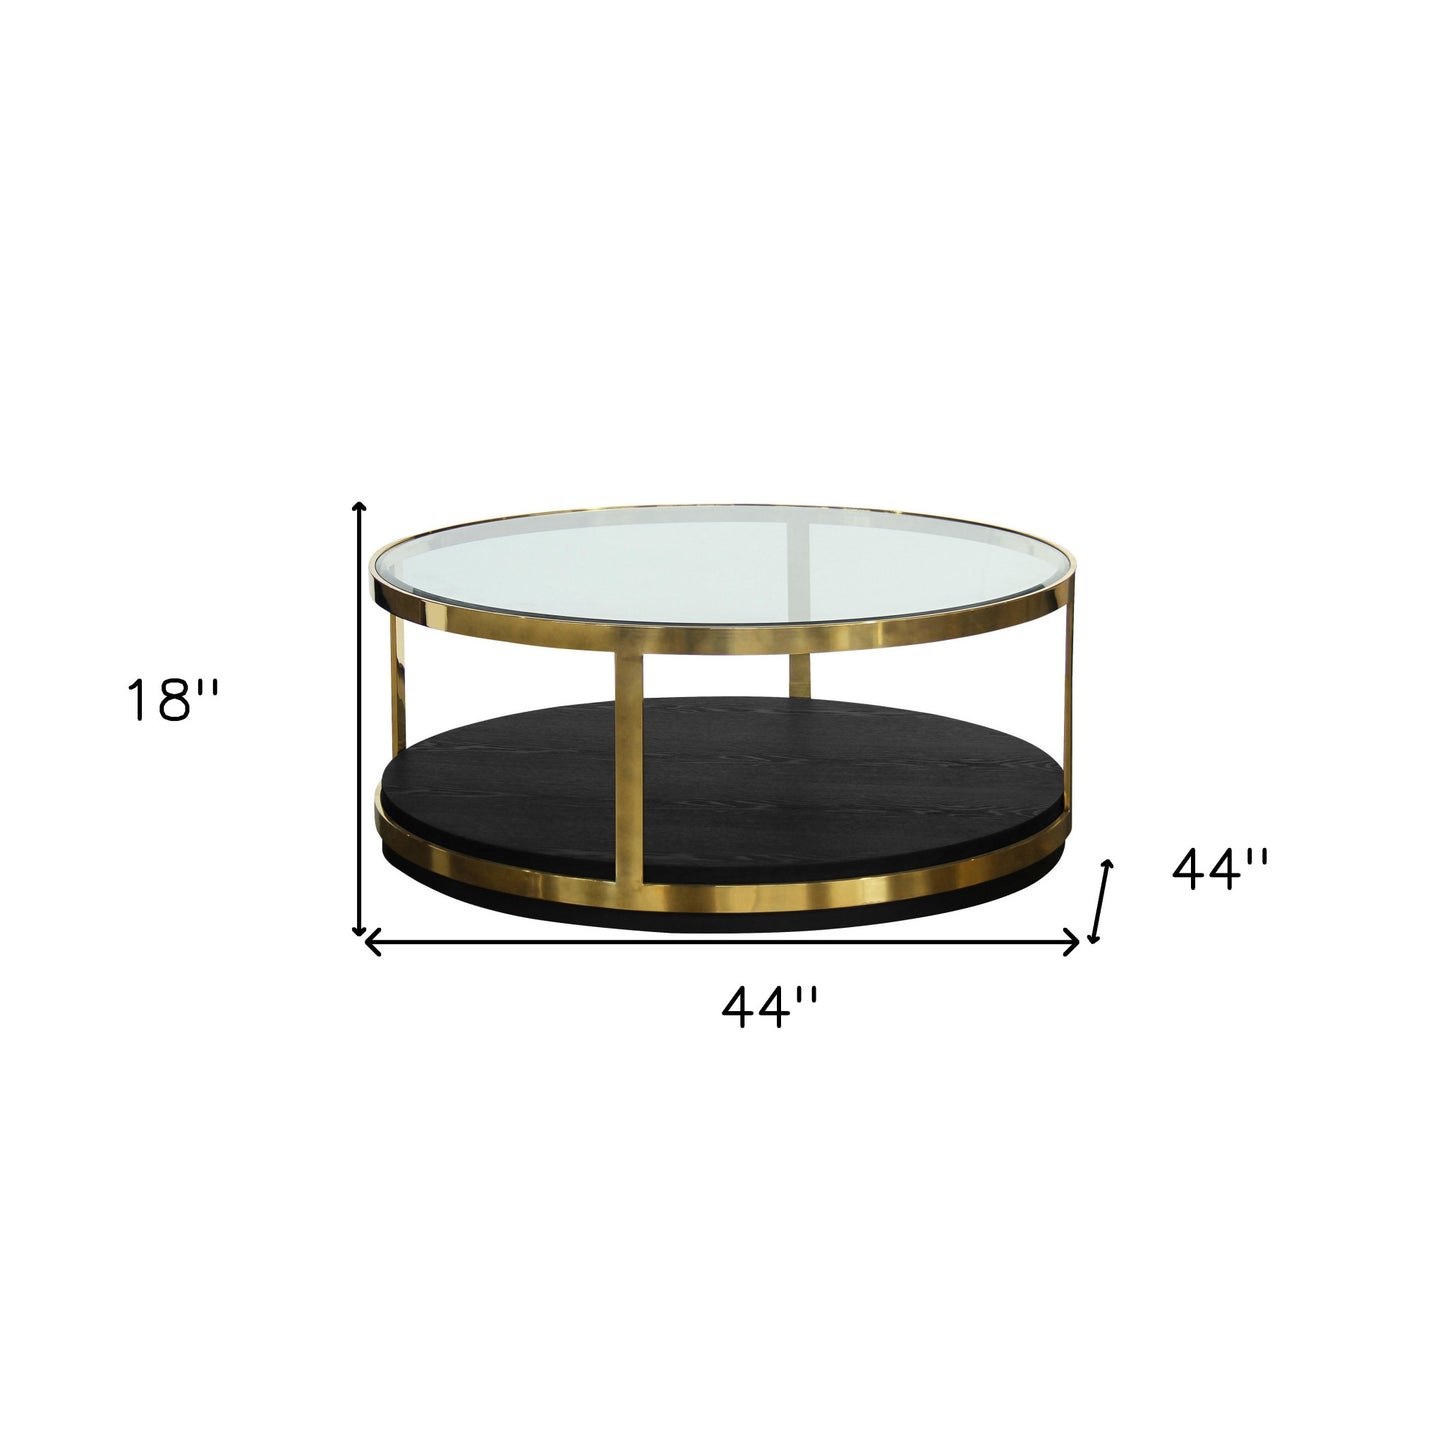 44" Black And Gold Glass And Metal Round Coffee Table With Shelf